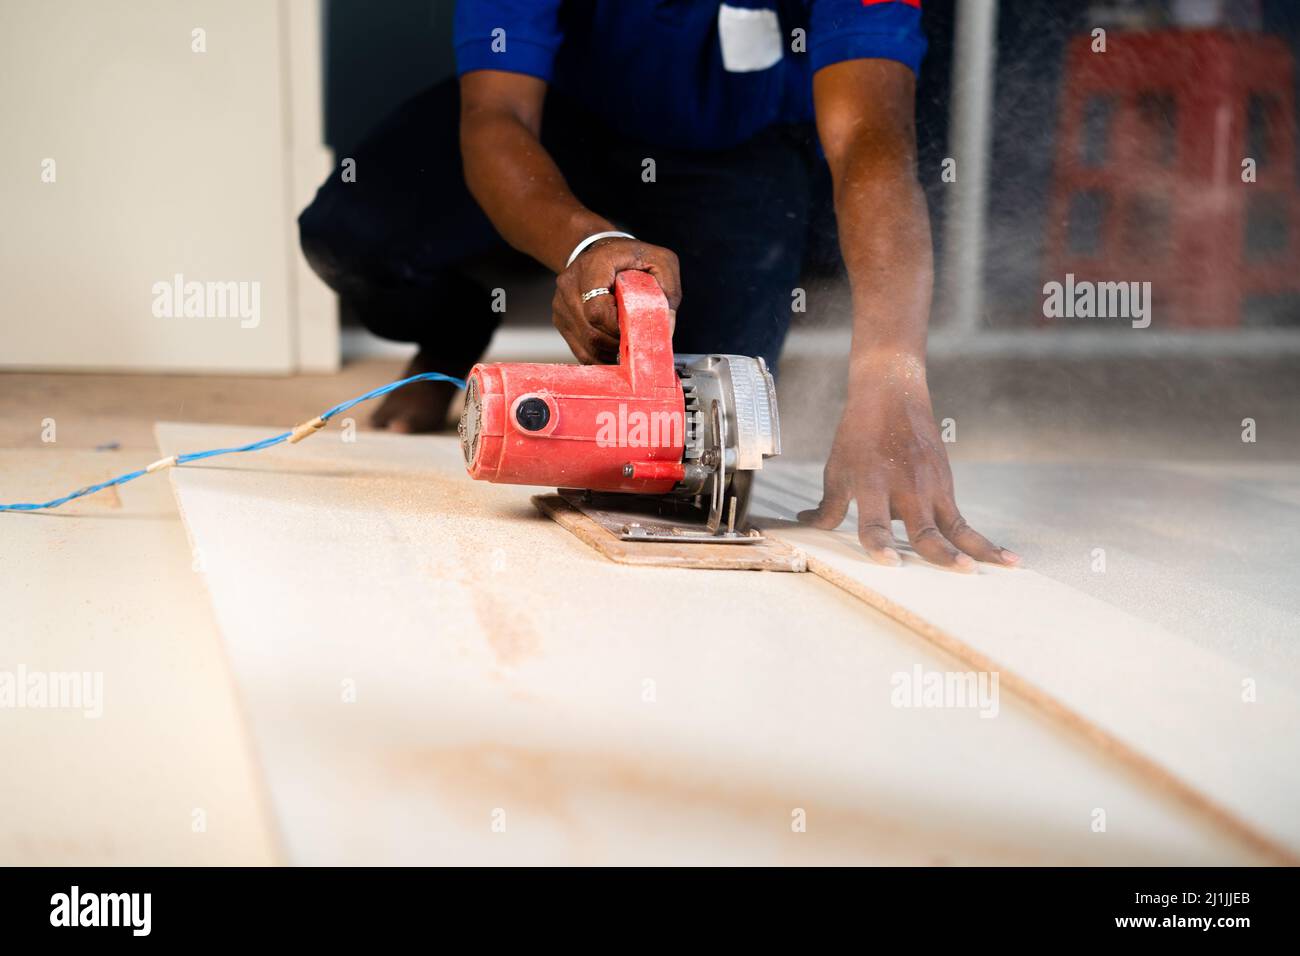 Close shot of carpenter or wood worker cutting wood by using circular saw machine at workplace - concept of hard wood working, renovation and skilled Stock Photo